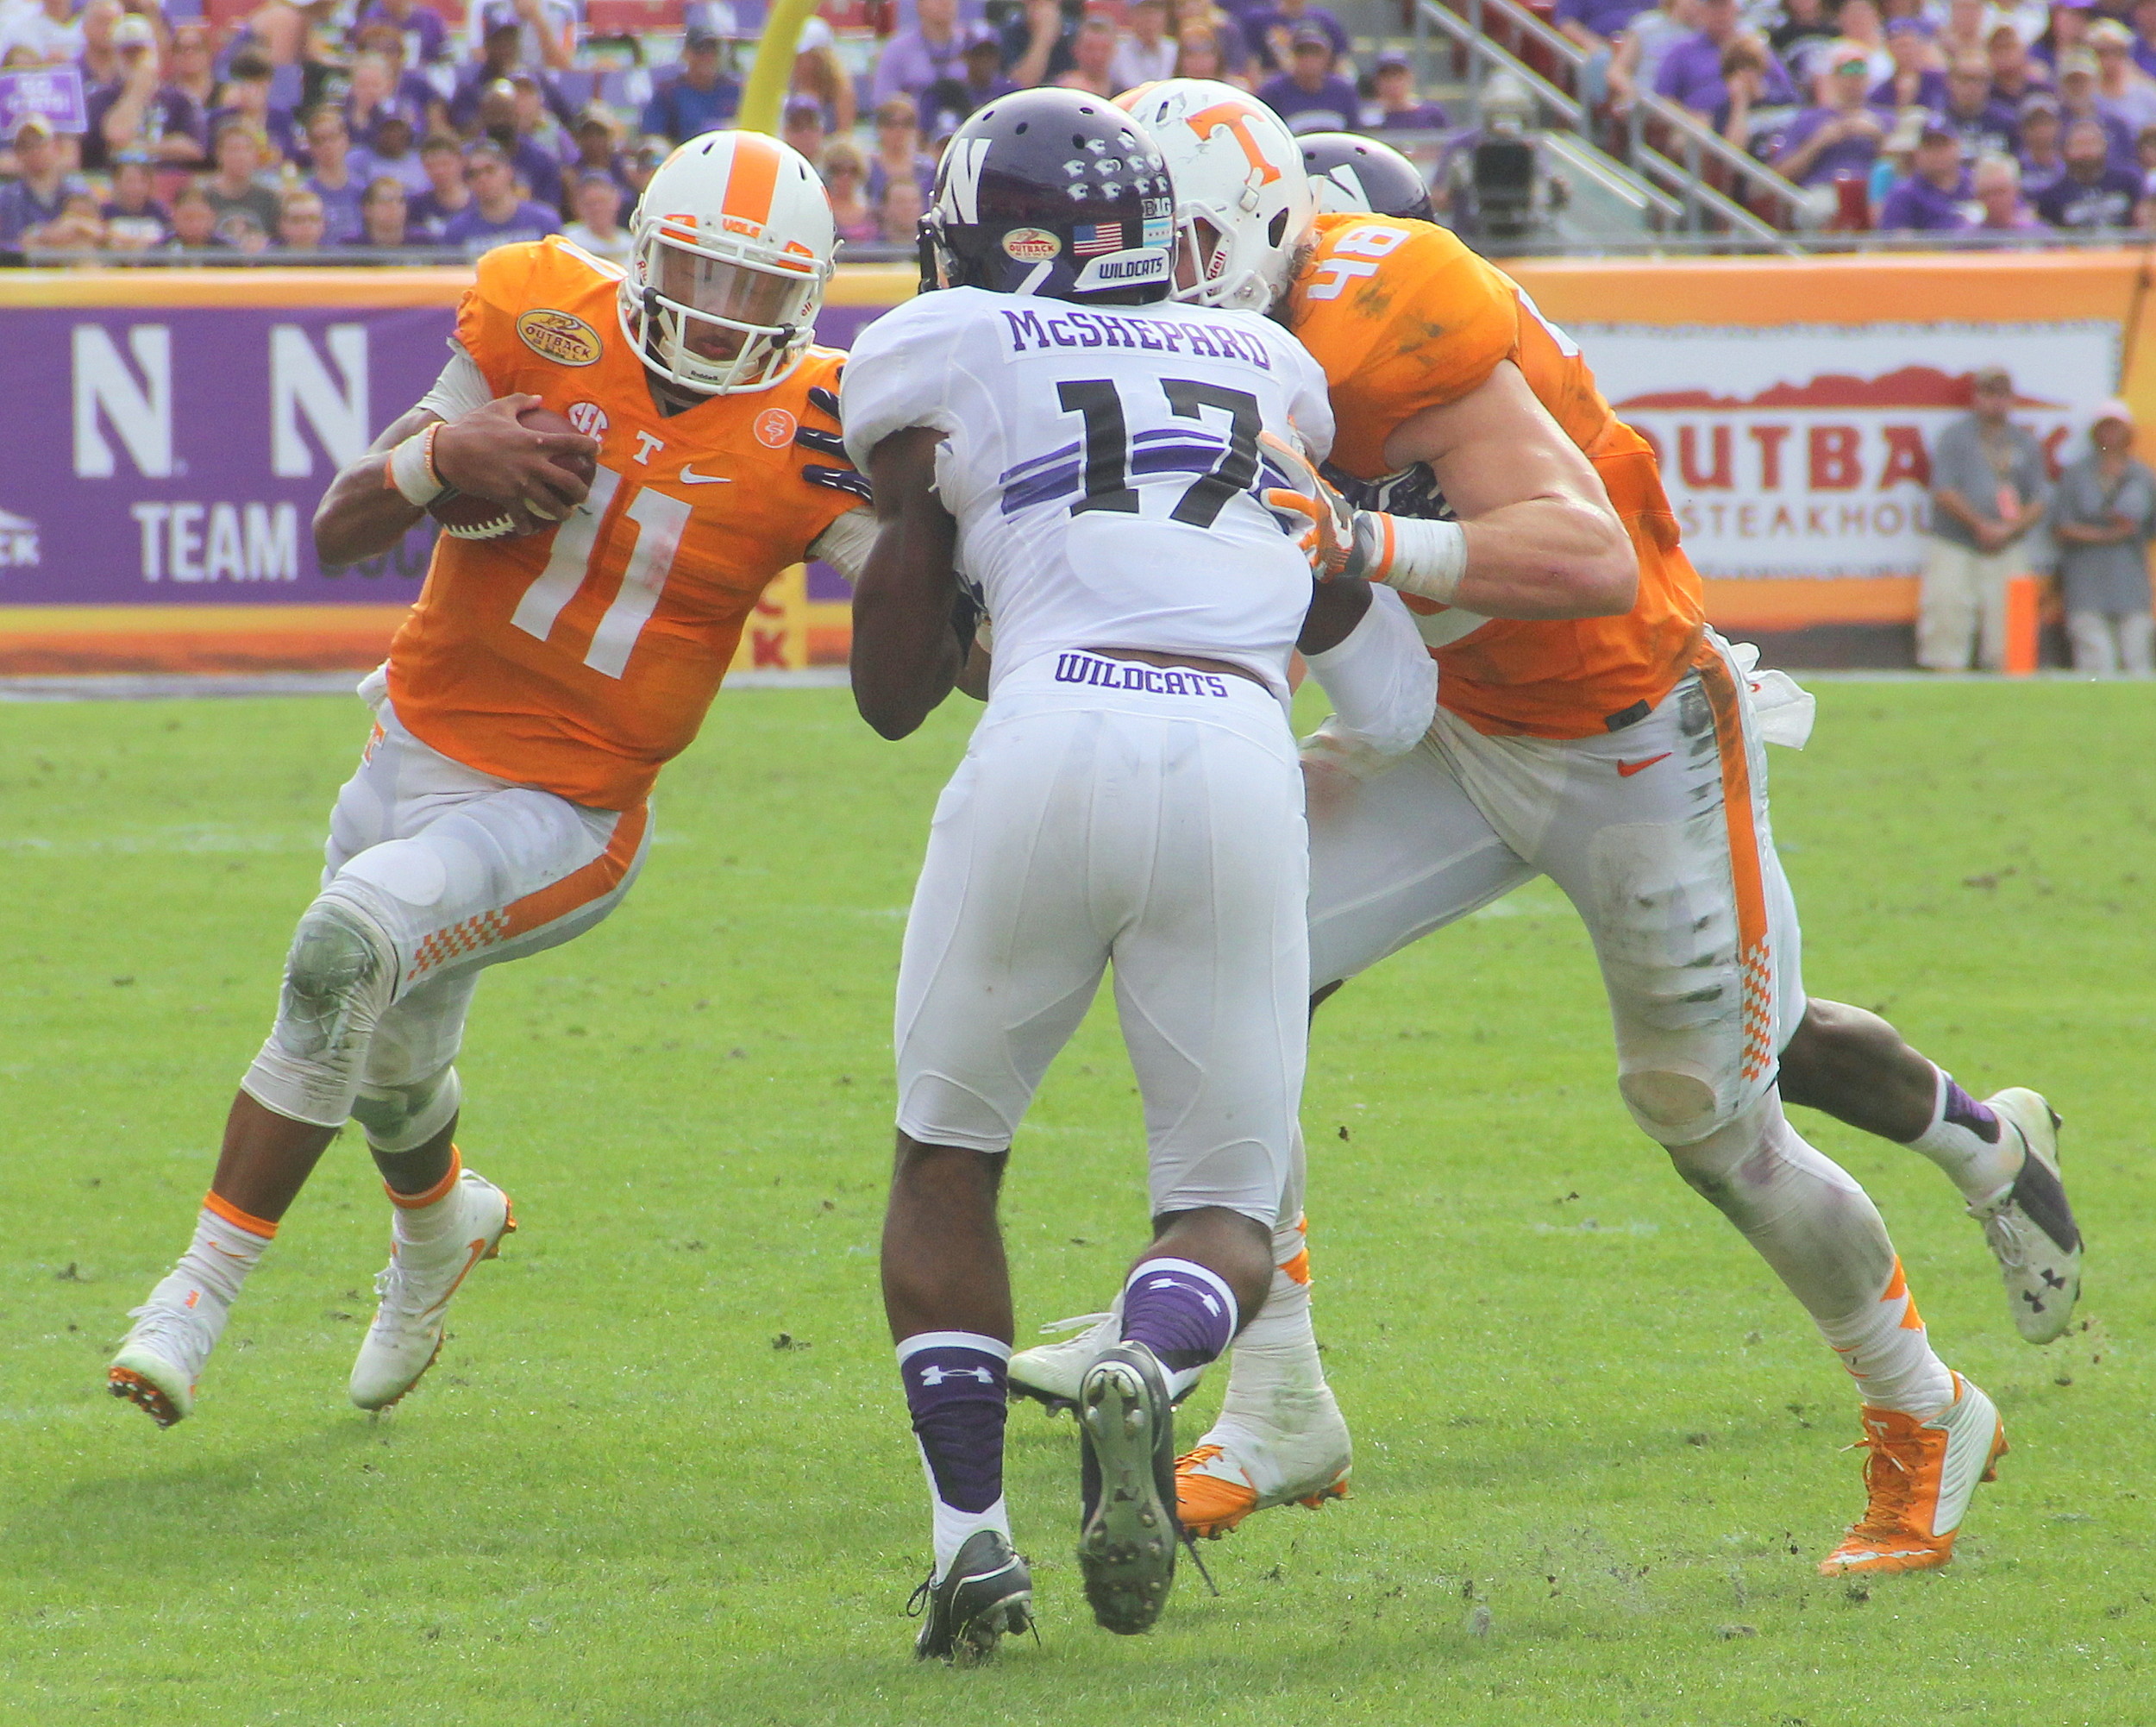 Tennessee QB Joshua Dobbs (11) ran for 48 yards and two touchdowns. Dobbs also completed 14 of 25 passes for 166 yards in a victory over Northwestern in the Outback Bowl.